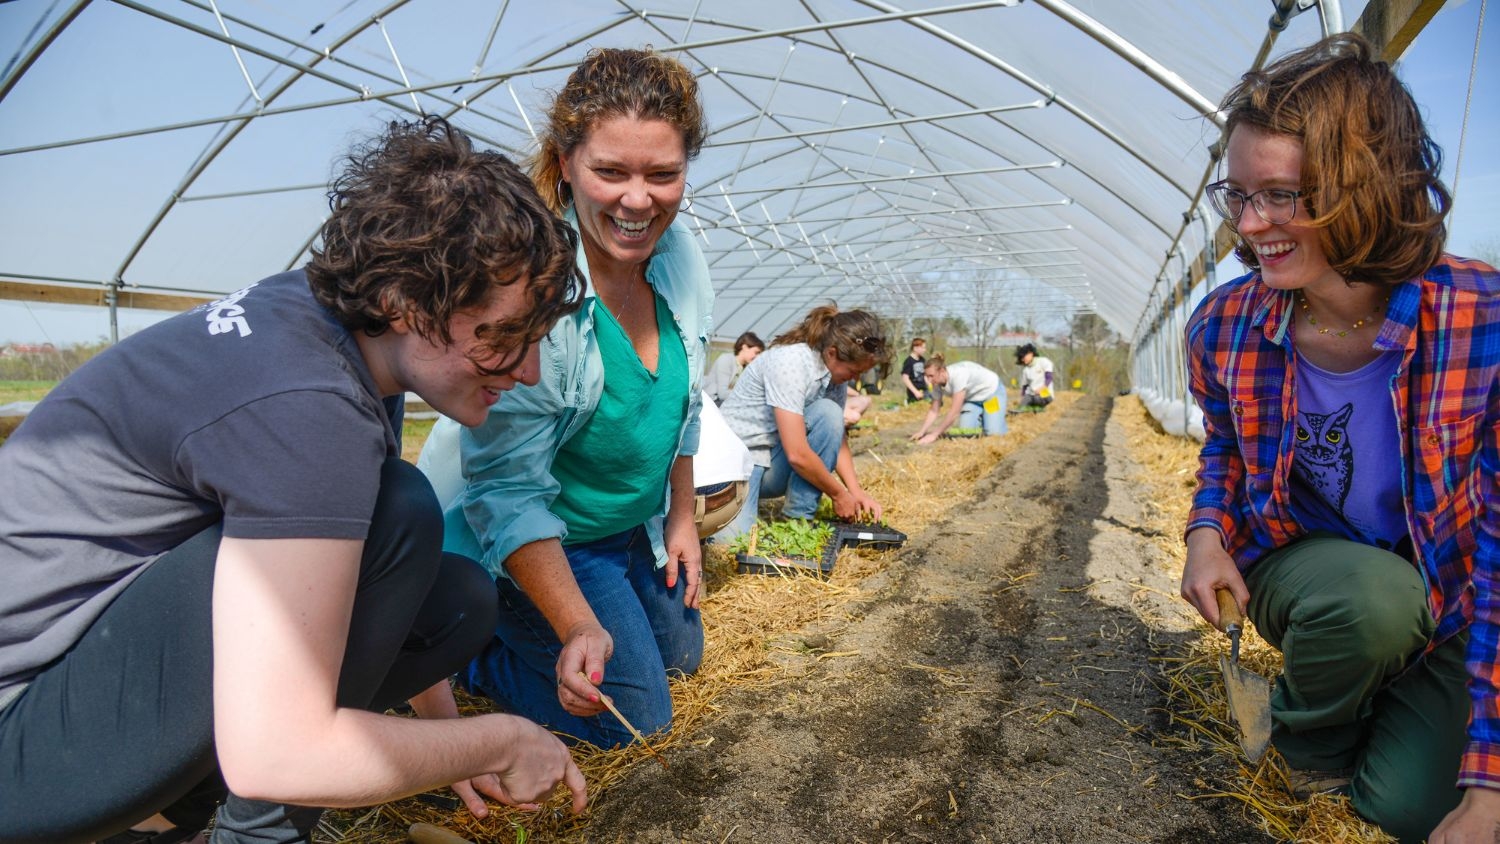 Volunteers and community participants take part in an Extension gardening demonstration inside of a greenhouse